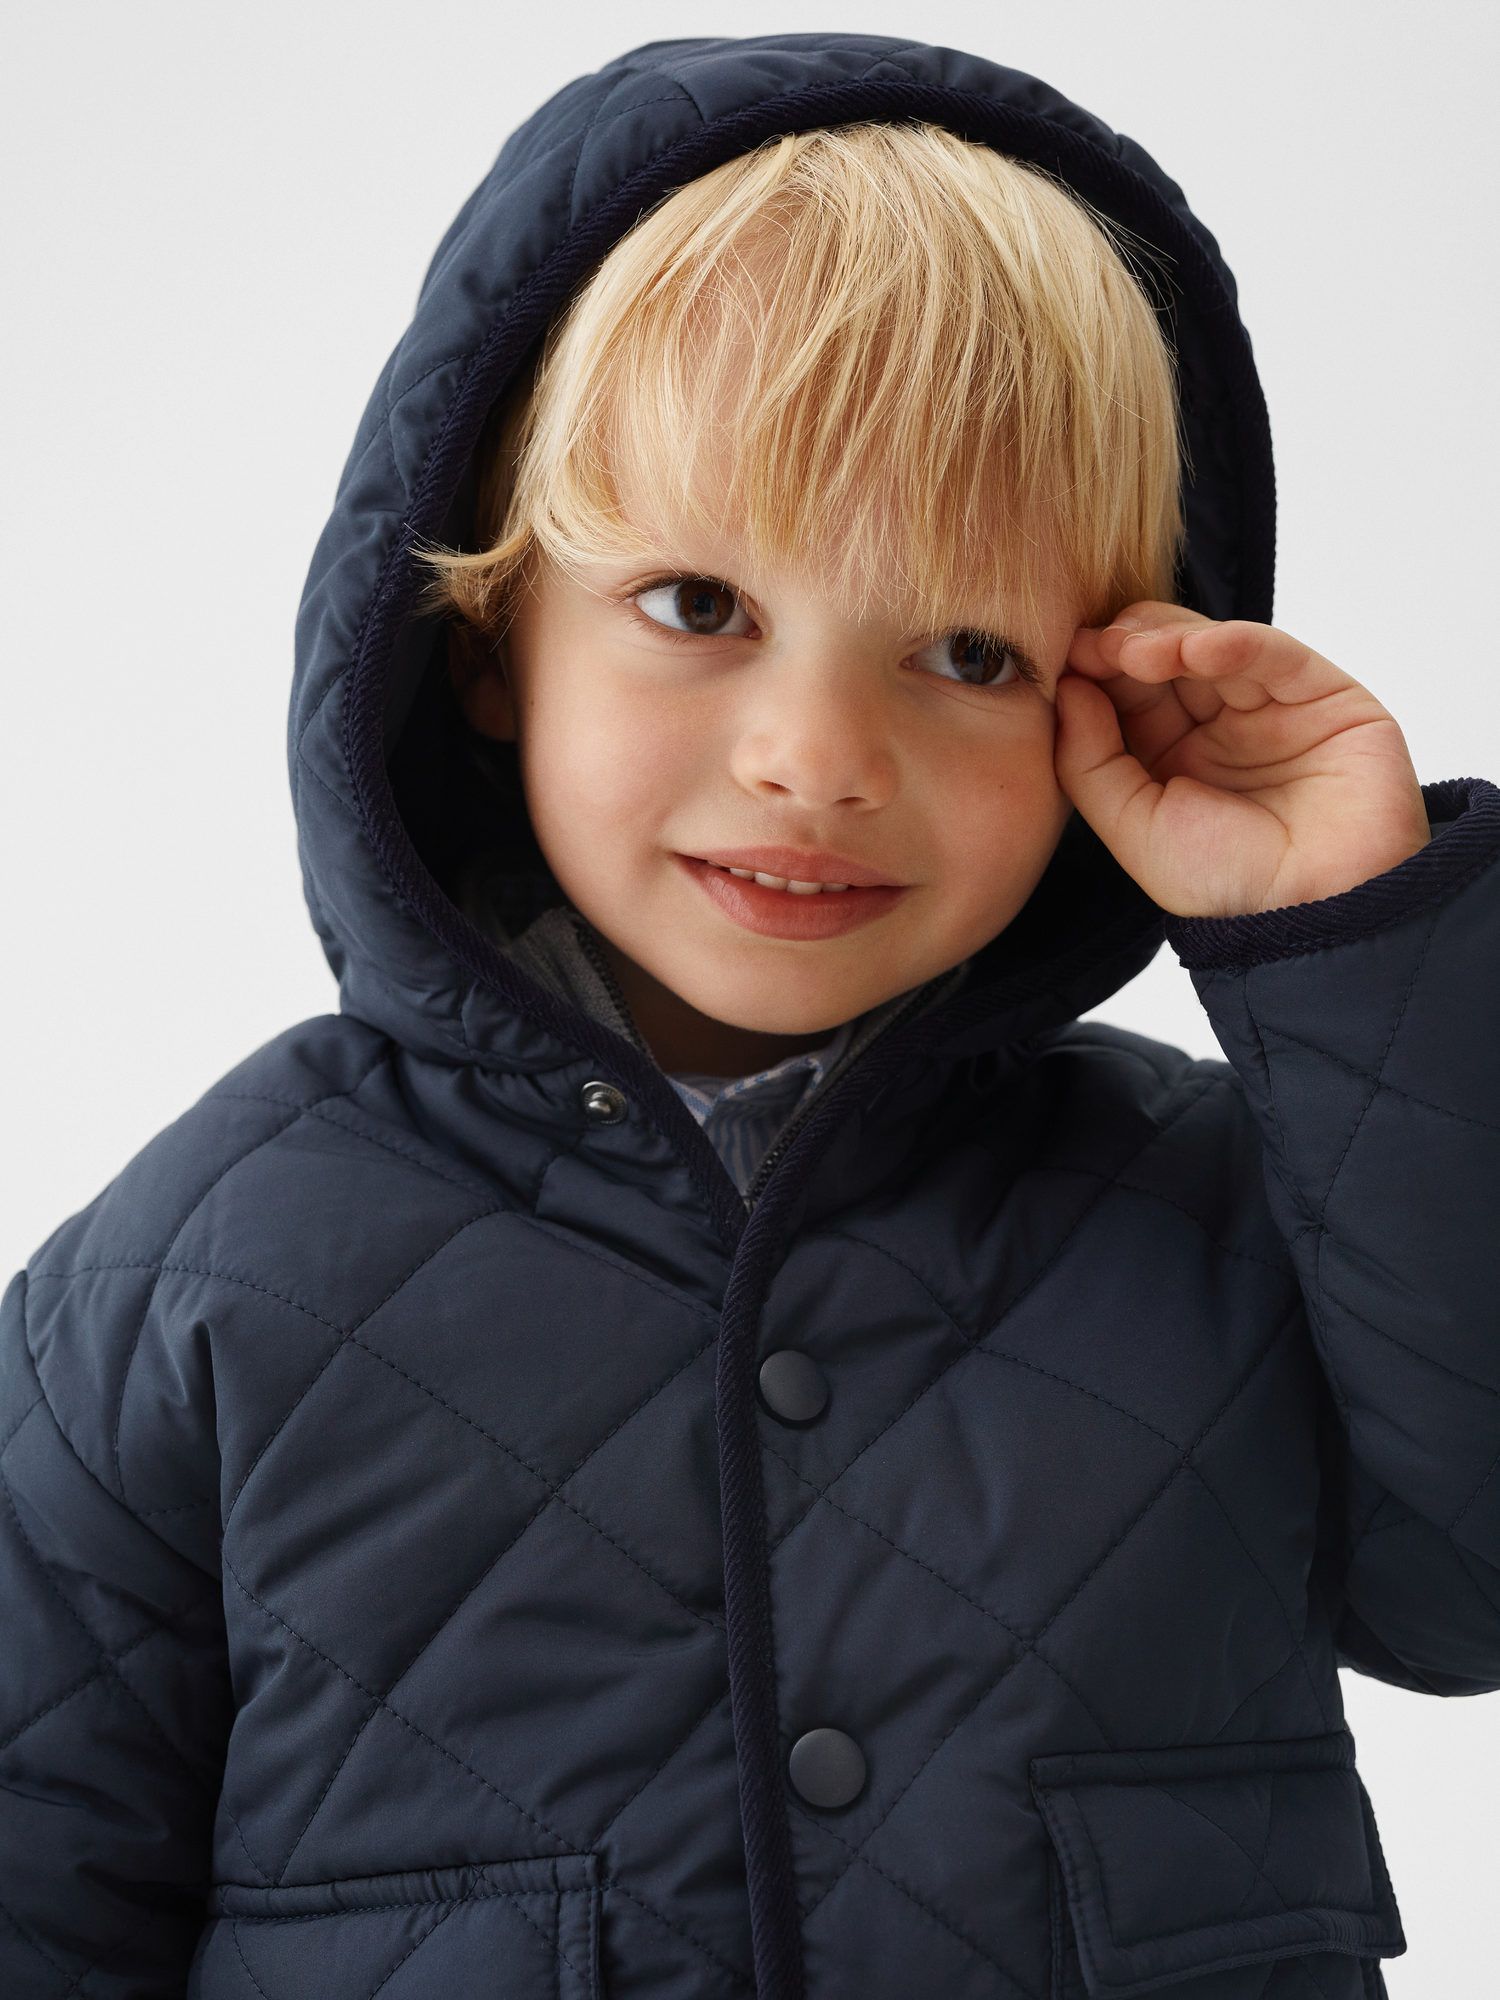 Mango Baby Husky Hooded Quilted Jacket, Navy, 12-18 months